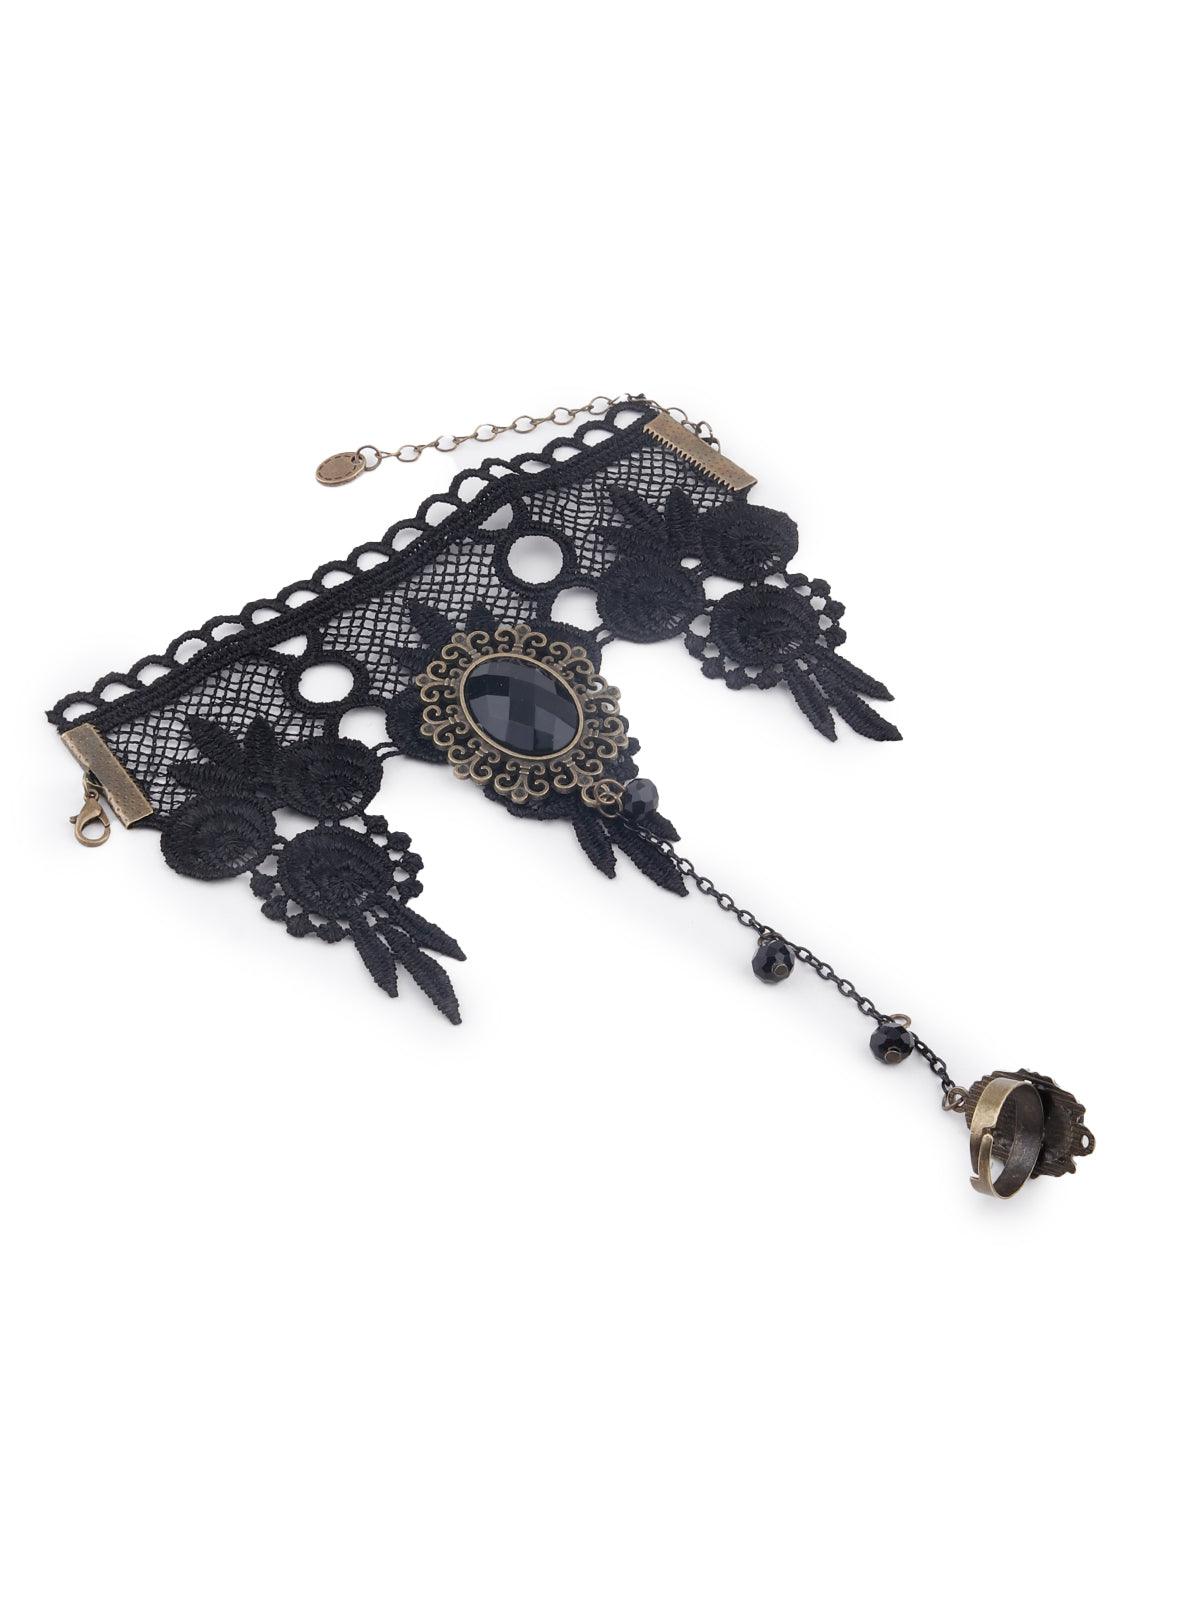 Women's Black Lace Bracelet Secured With A Ring Chain - Odette